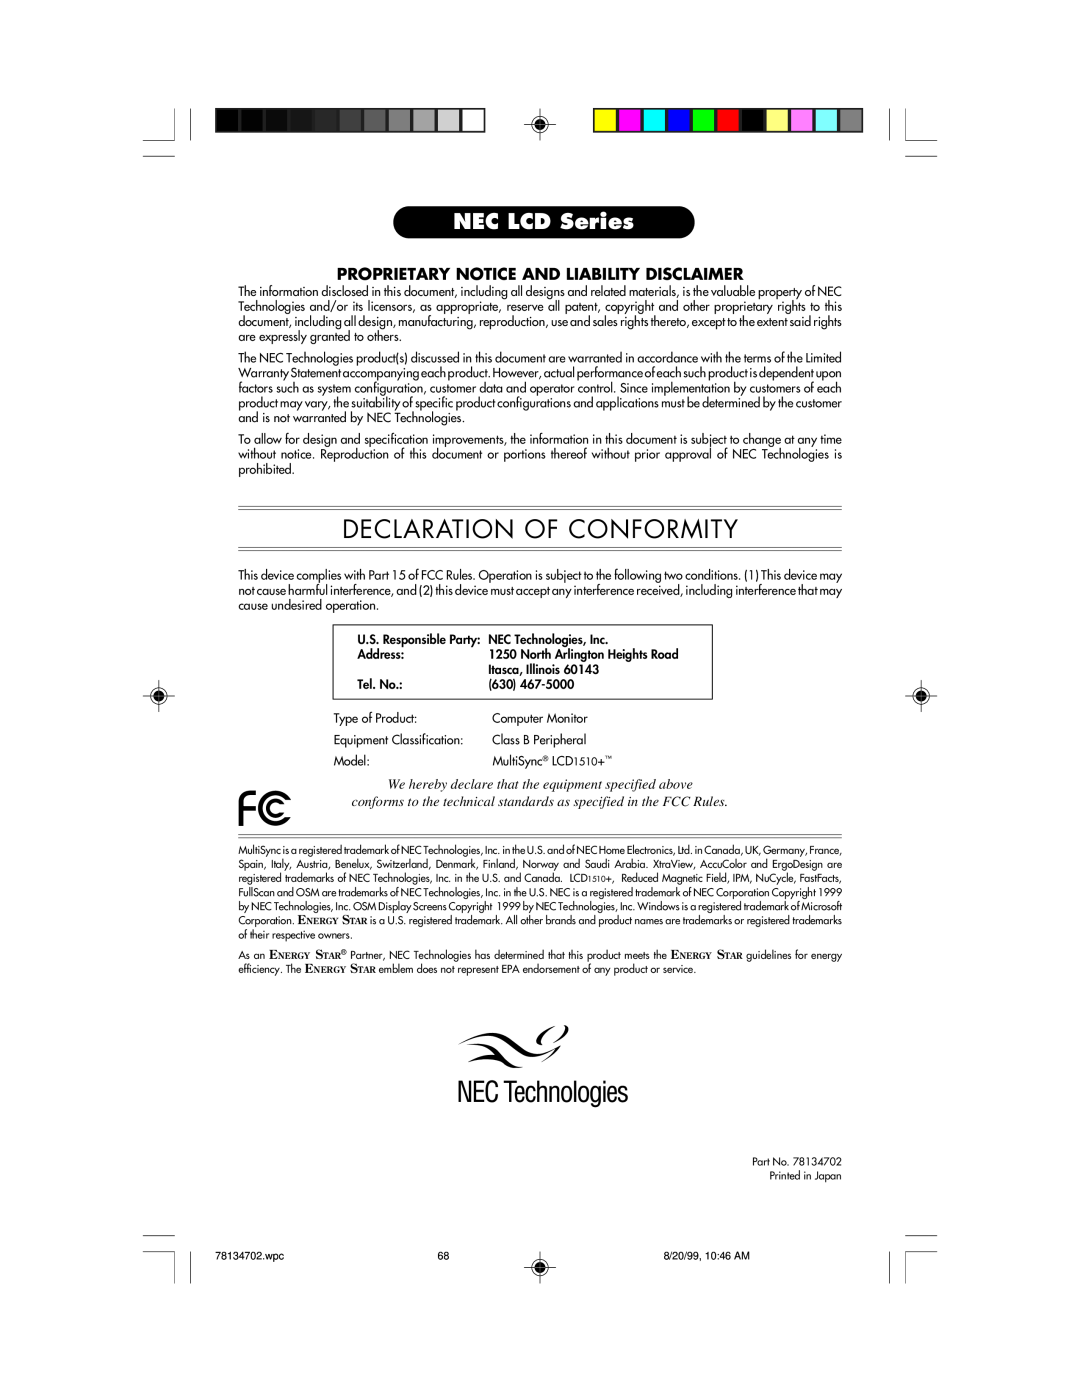 NEC LCD1510+ user manual Declaration Of Conformity, NEC LCD Series, Proprietary Notice And Liability Disclaimer 